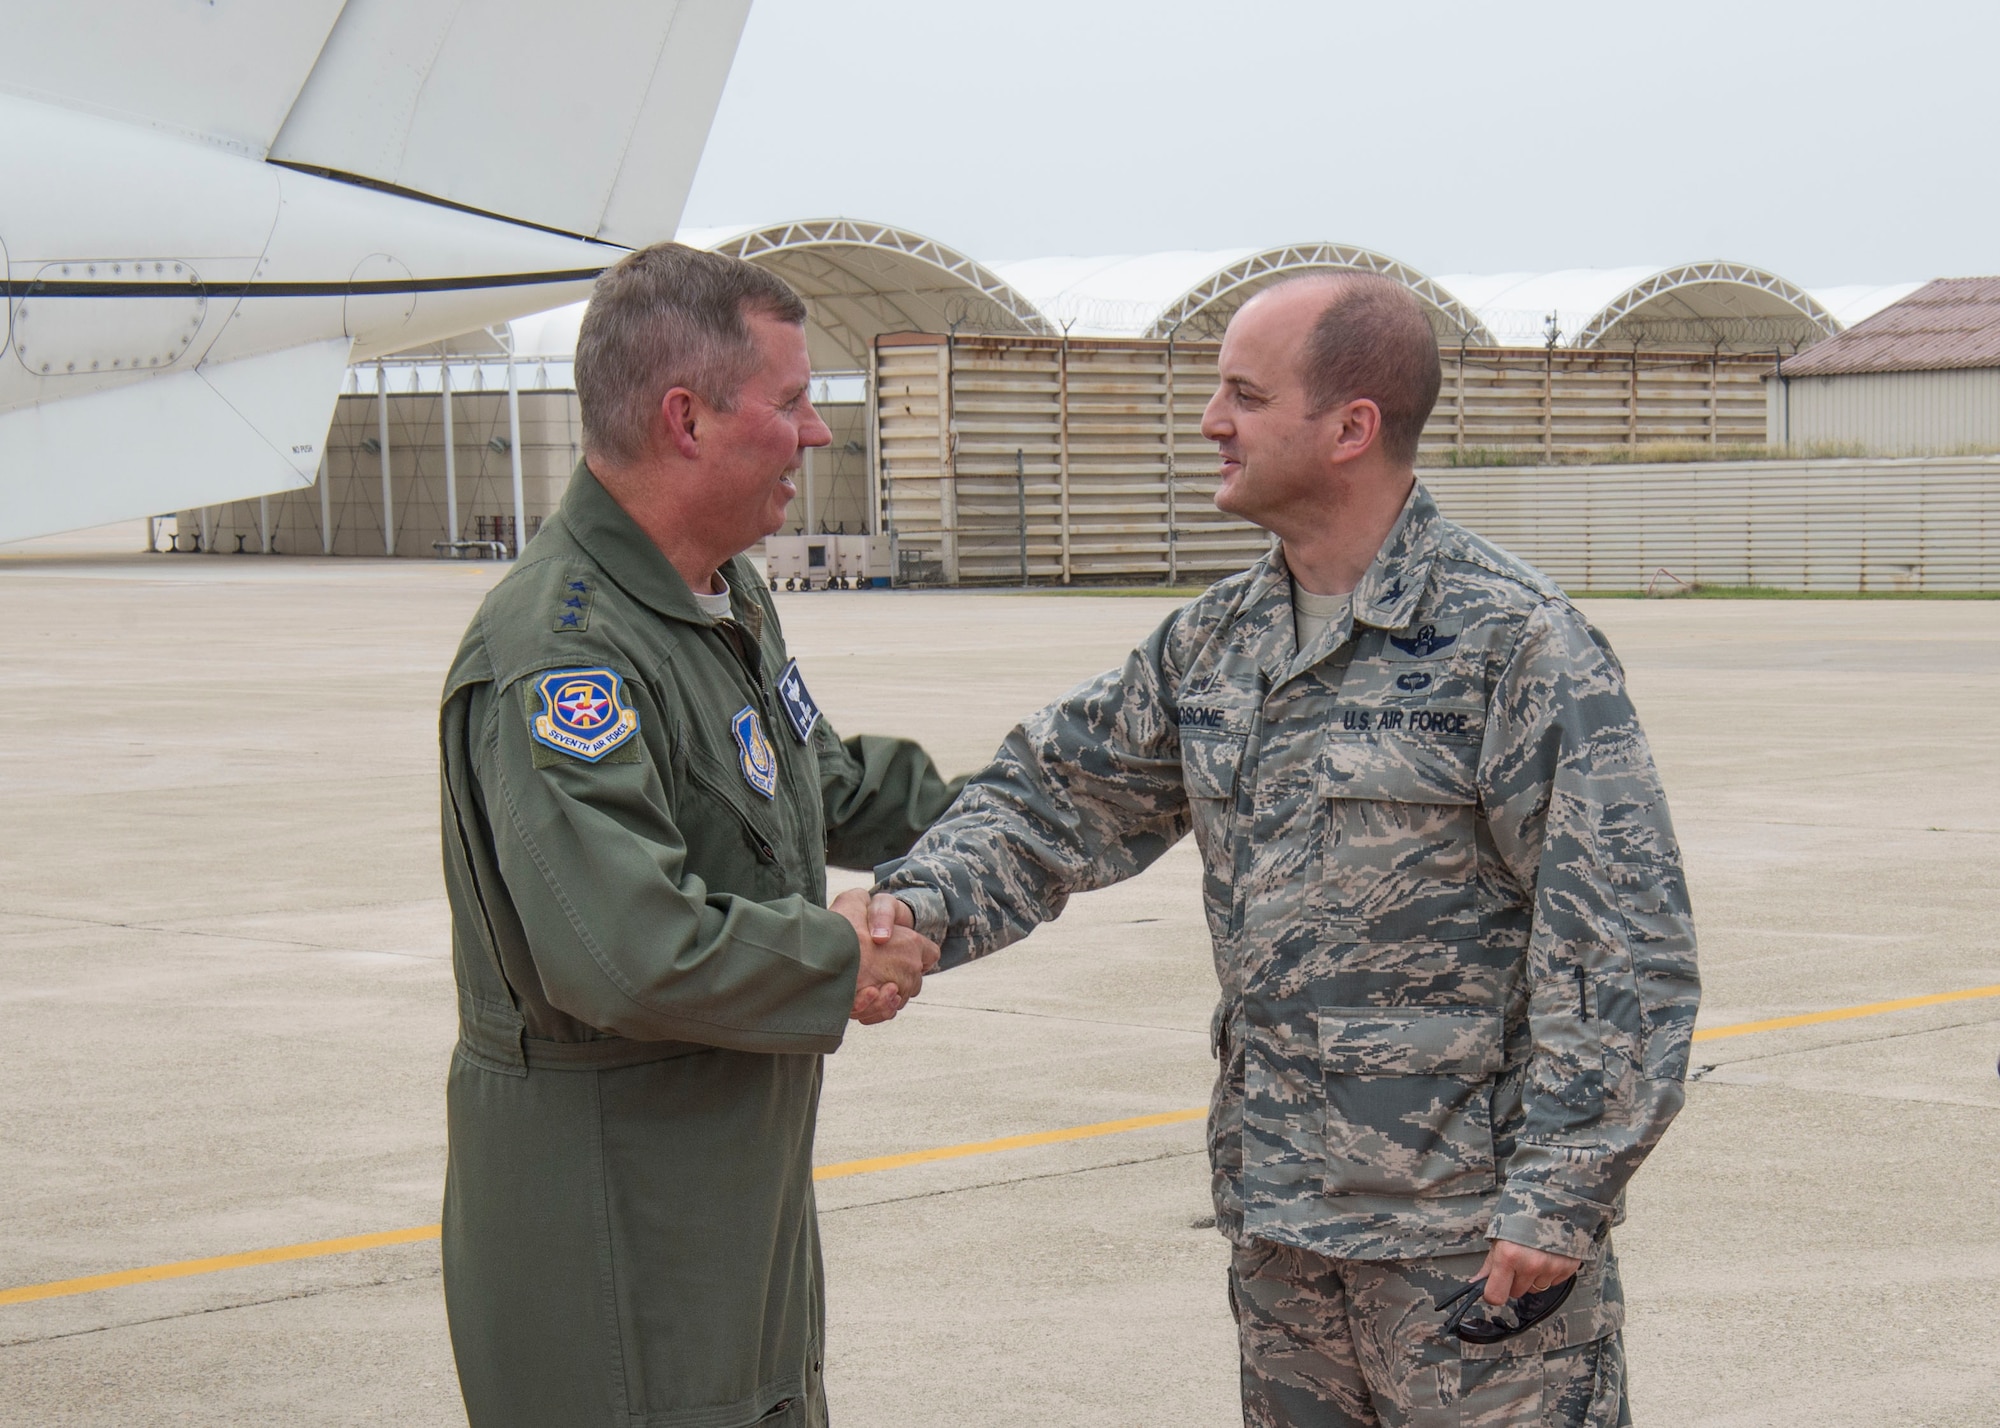 Col. John Bosone, 8th Fighter Wing commander, greets Lt. Gen. Thomas Bergeson, 7th Air Force commander, after arriving at Kunsan Air Base, Republic of Korea, June 22, 2018. During the visit Bergeson met with Wolf Pack leadership and visited Airmen. (U.S. Air Force photo by Tech. Sgt. Charles McNamara)